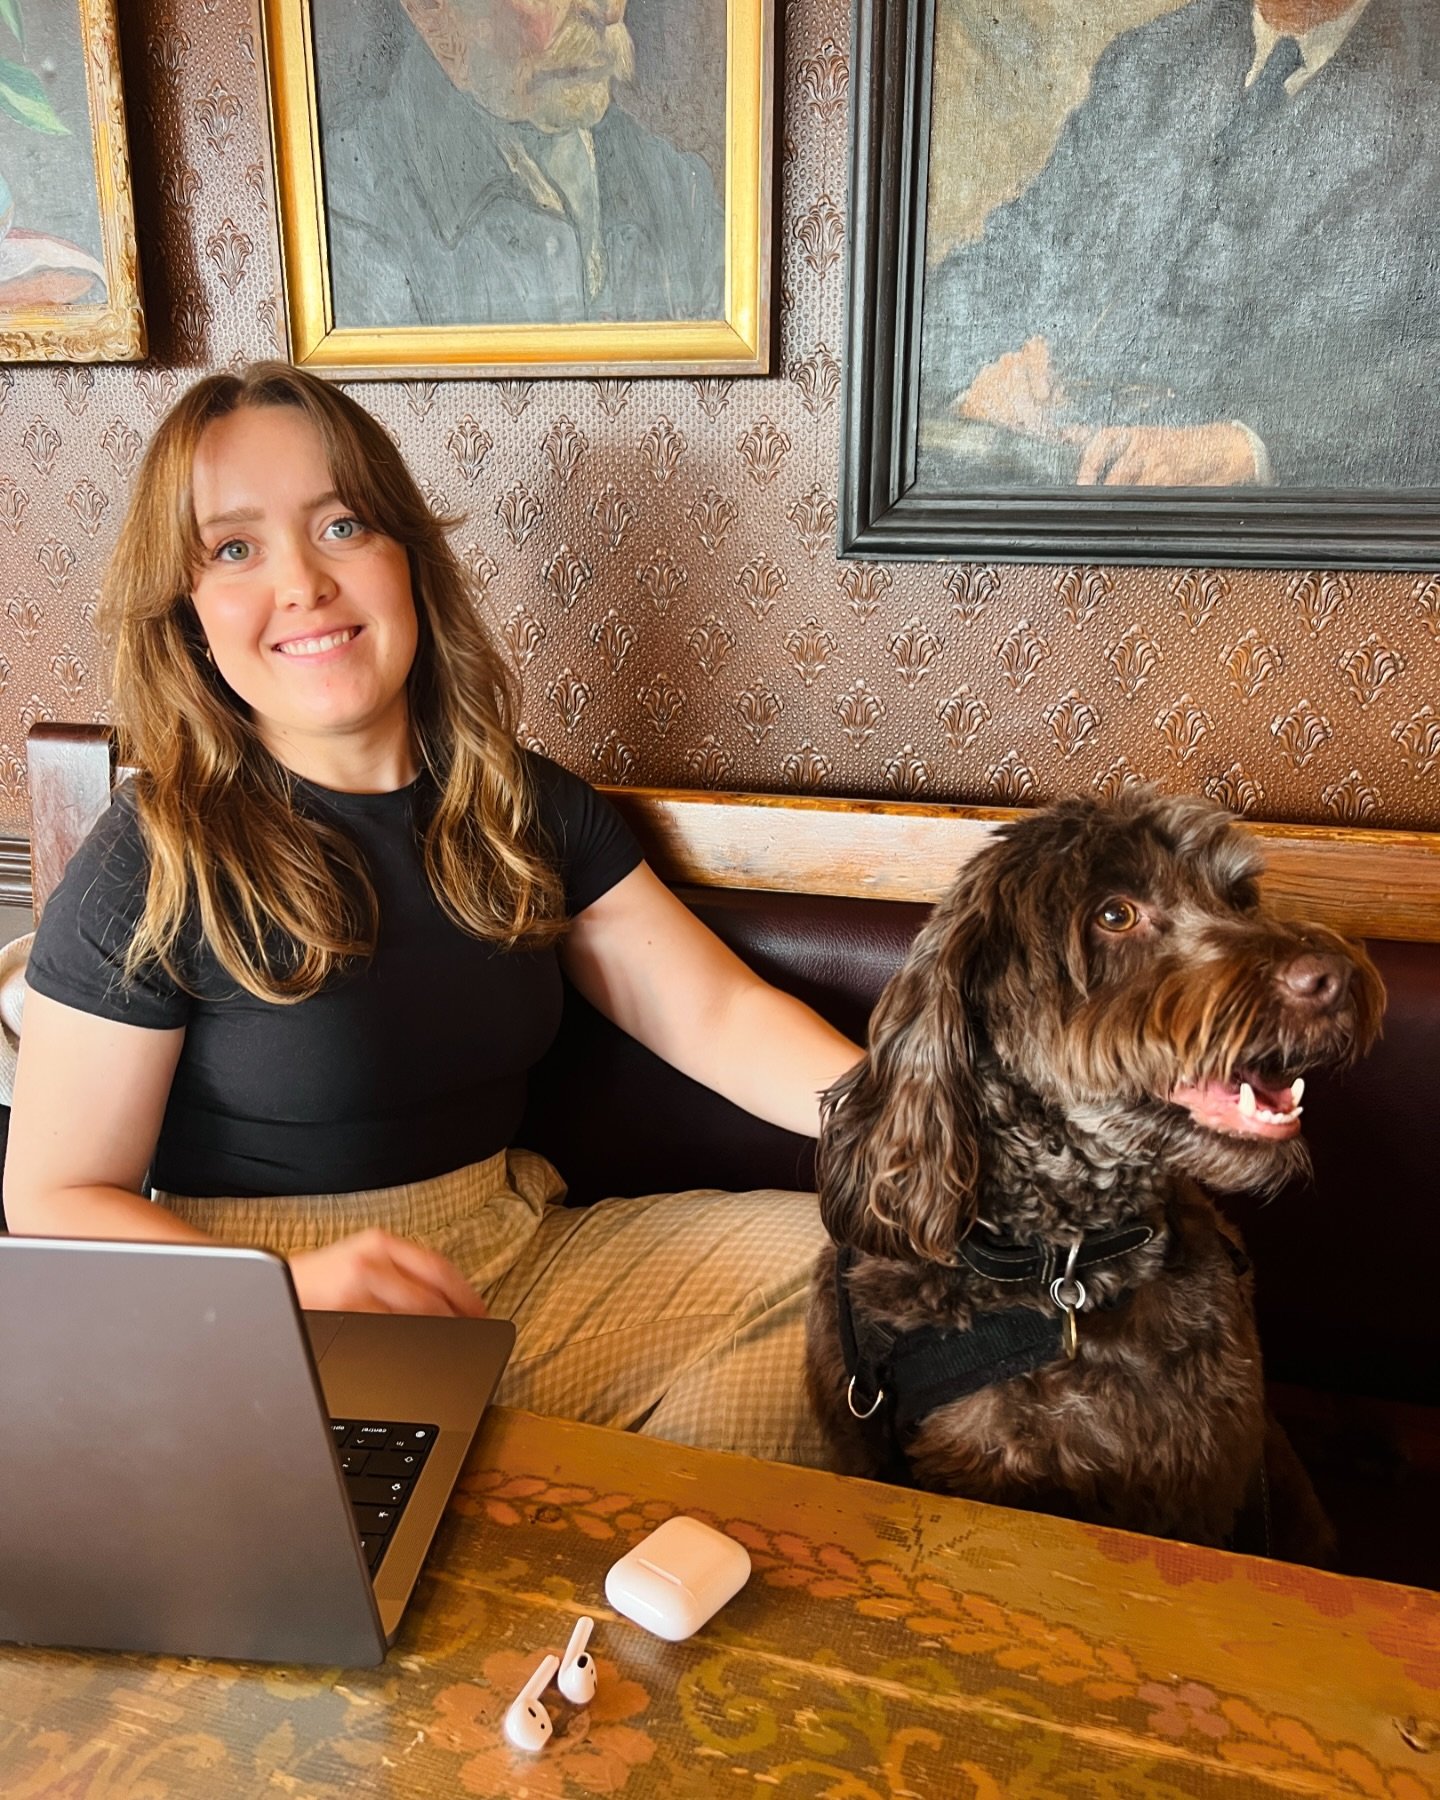 Happy Friday all! 👋🏼 Out and about today so working from @teatro_lounge with the pooch. Another hectic week this week. 

Two discovery calls completed with potential new clients and I now have 3 proposals to work on next week - although it&rsquo;s 